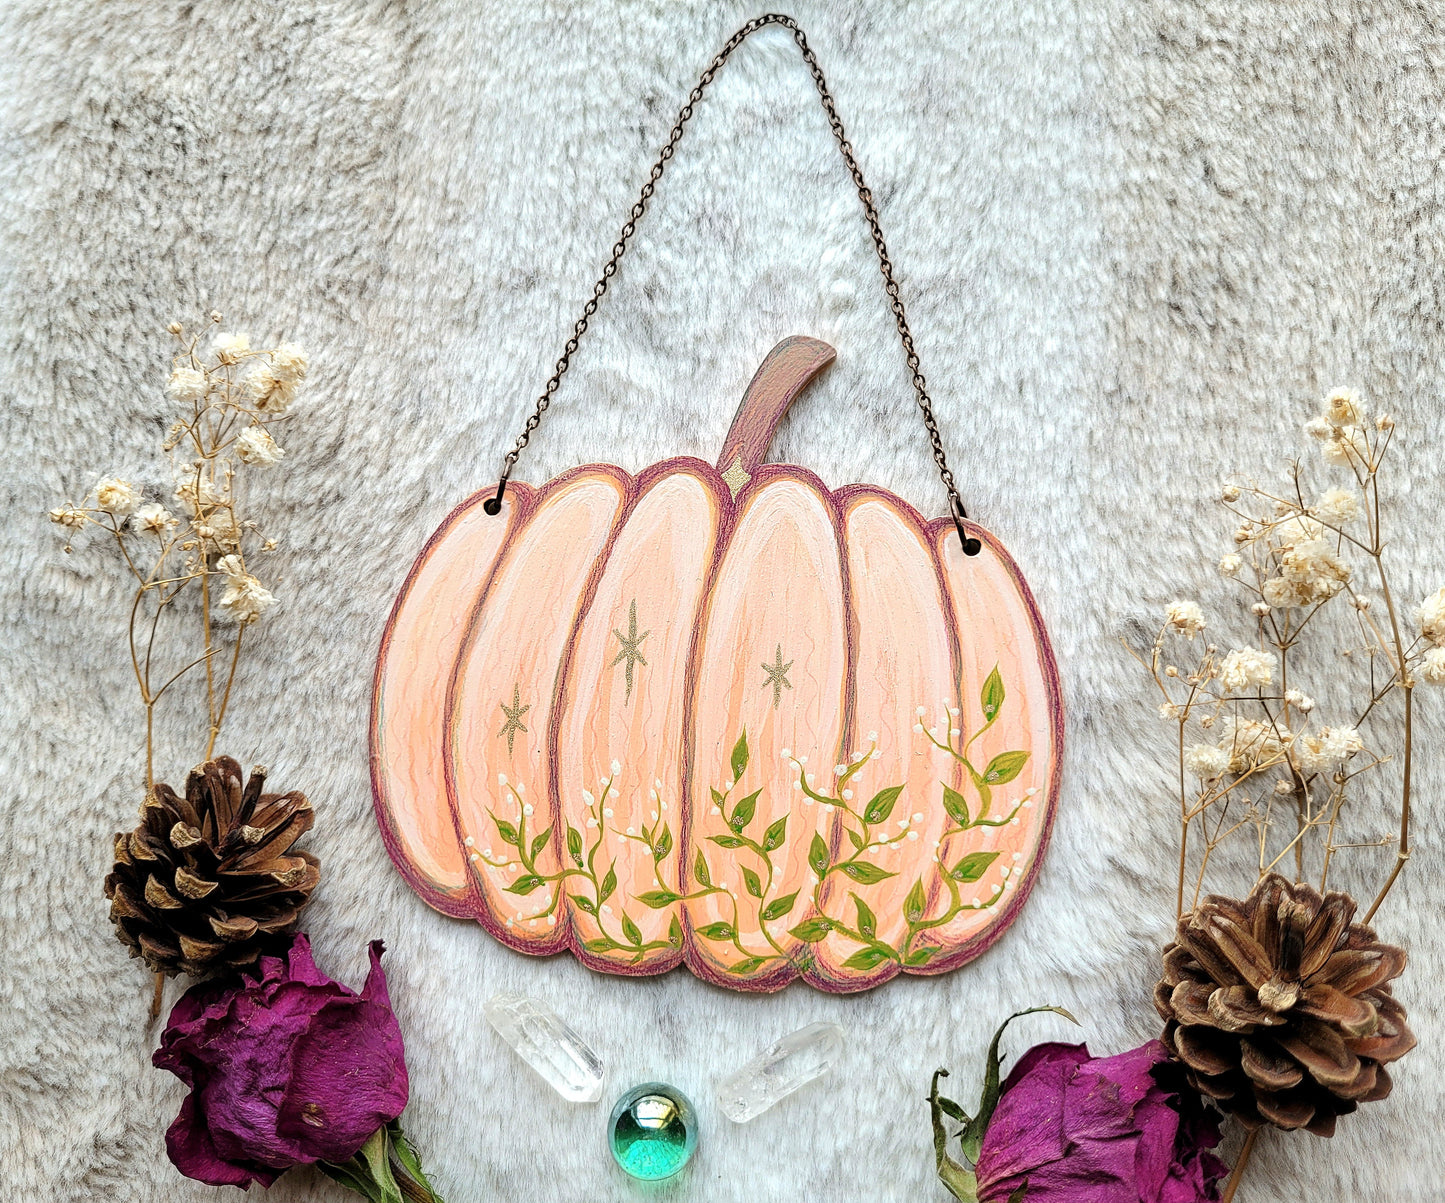 Original painted spring pumpkin - Pink - One of a kind handmade wall hanging by Grace Moth